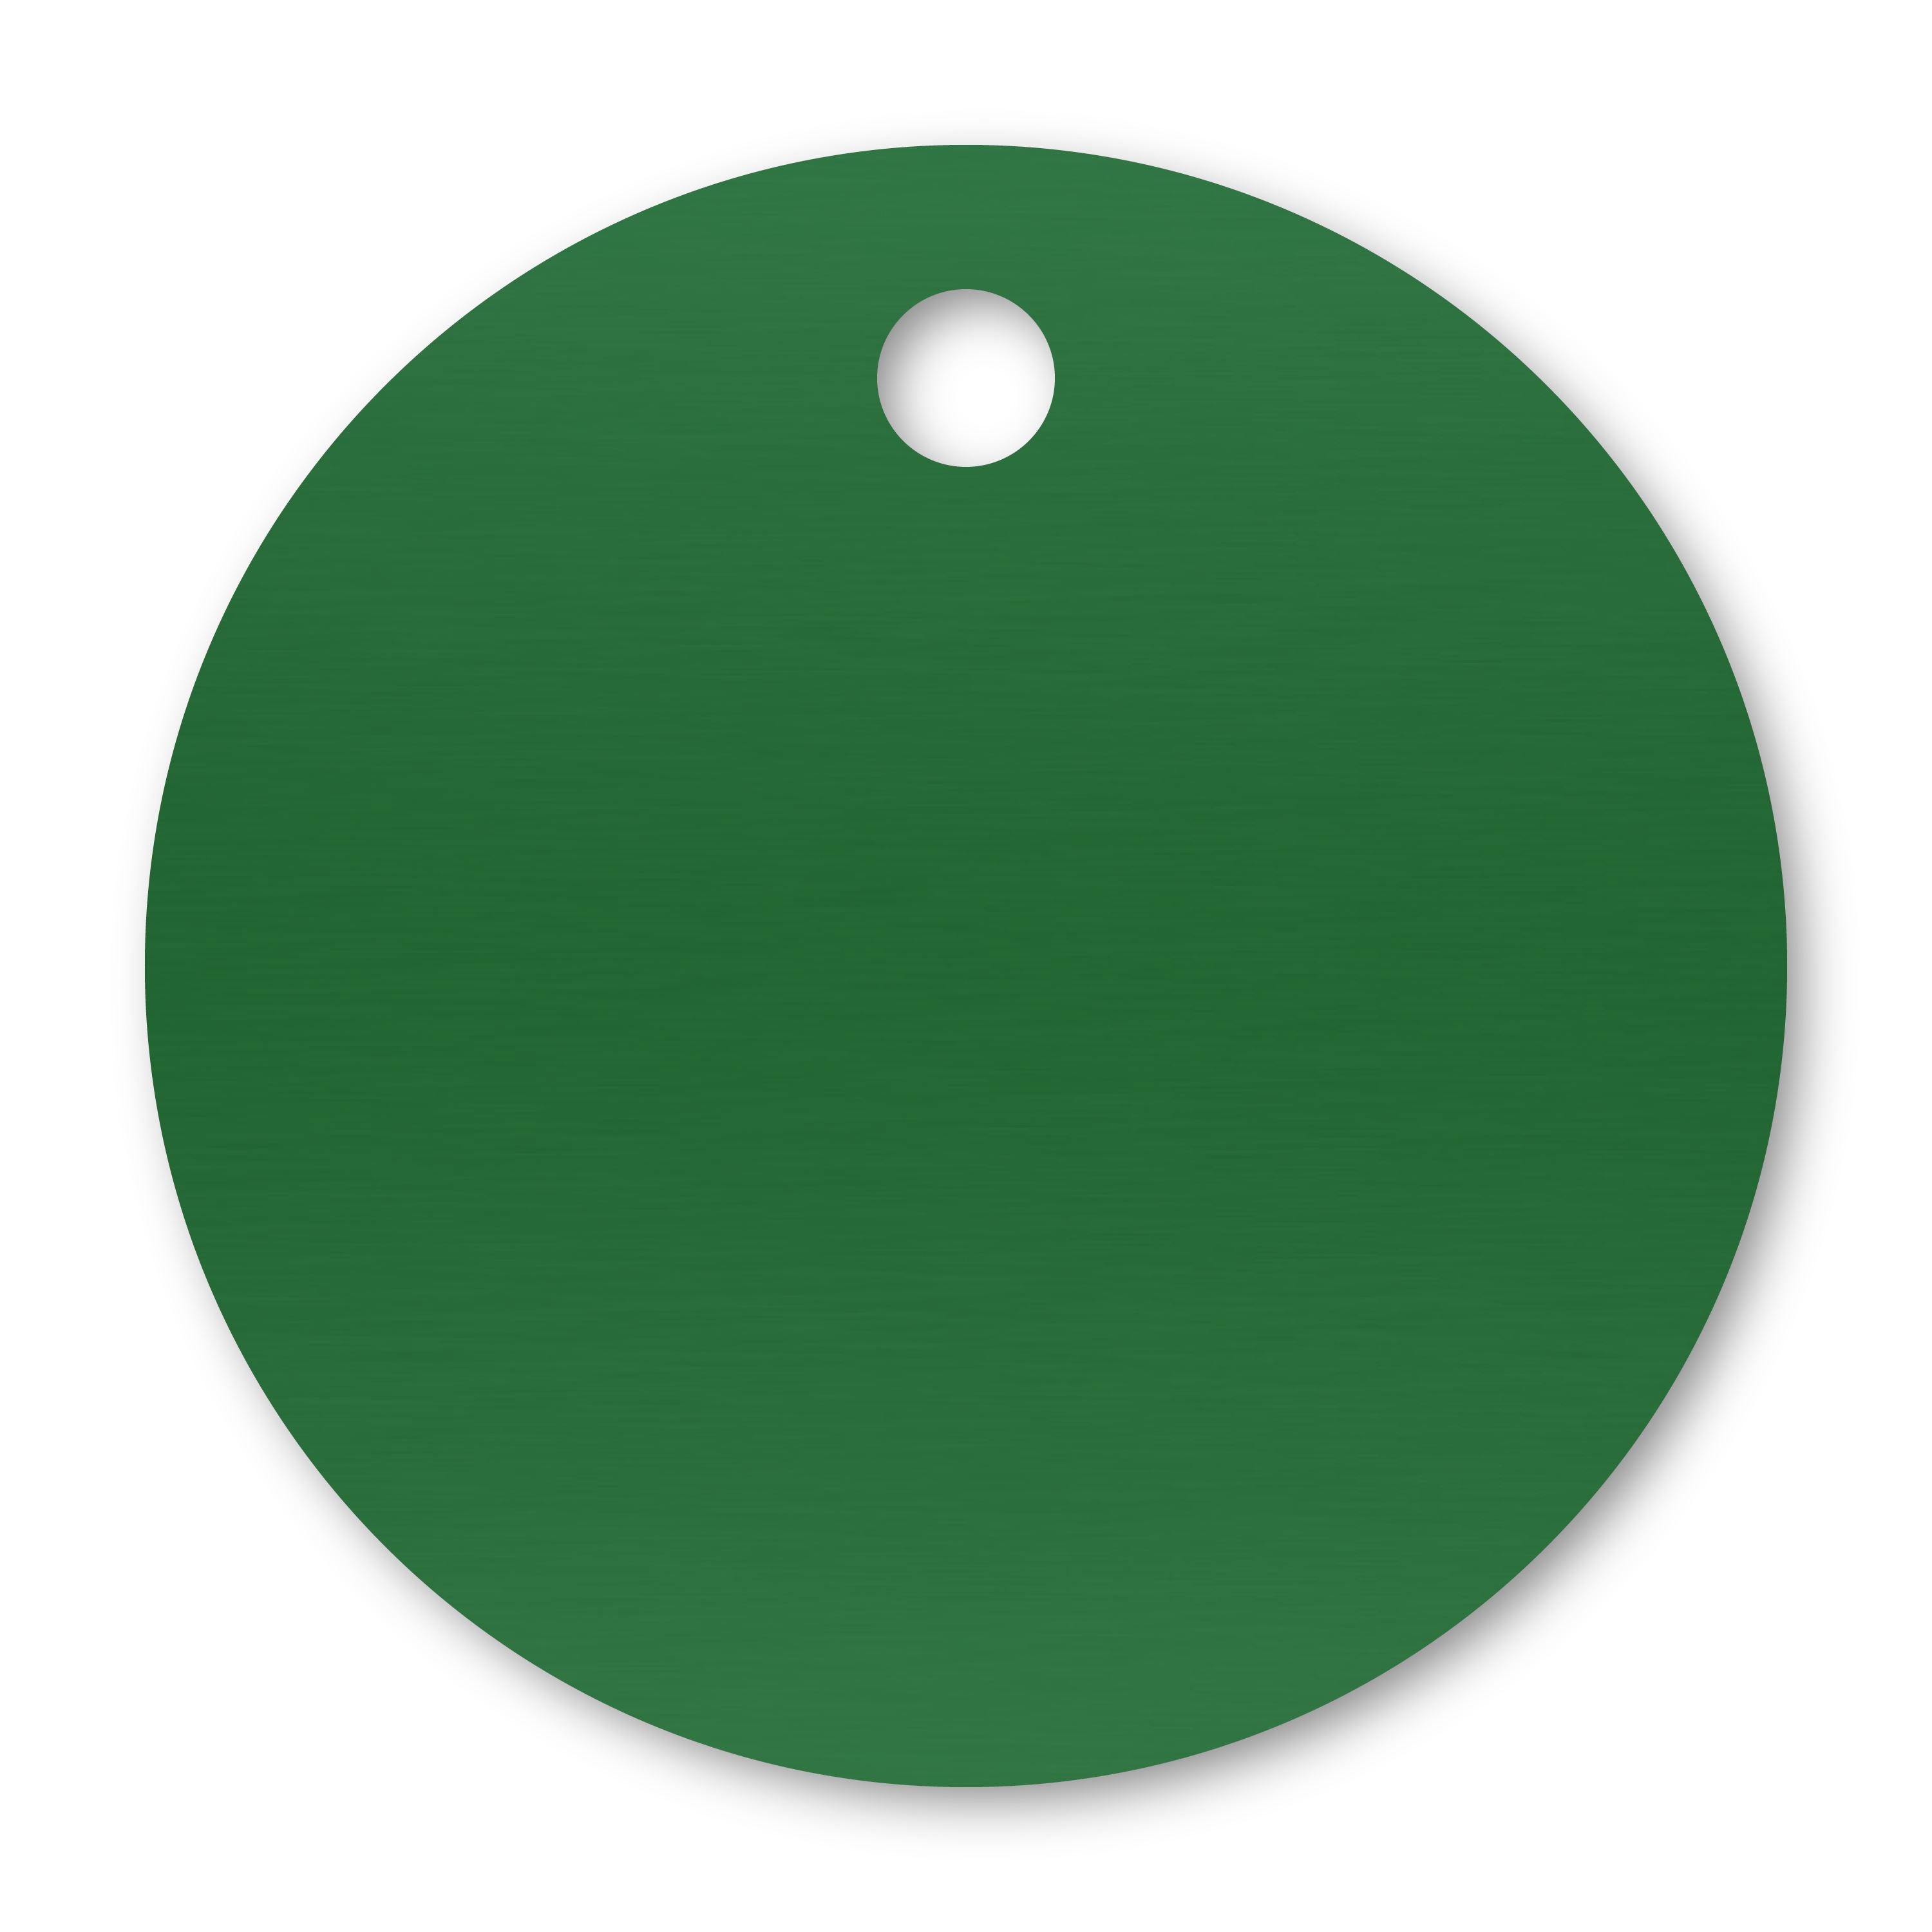 Anodized Aluminum Round Tags, 2" with 3/16" Hole, Laser Engraved Metal Tags Craftworks NW Green 